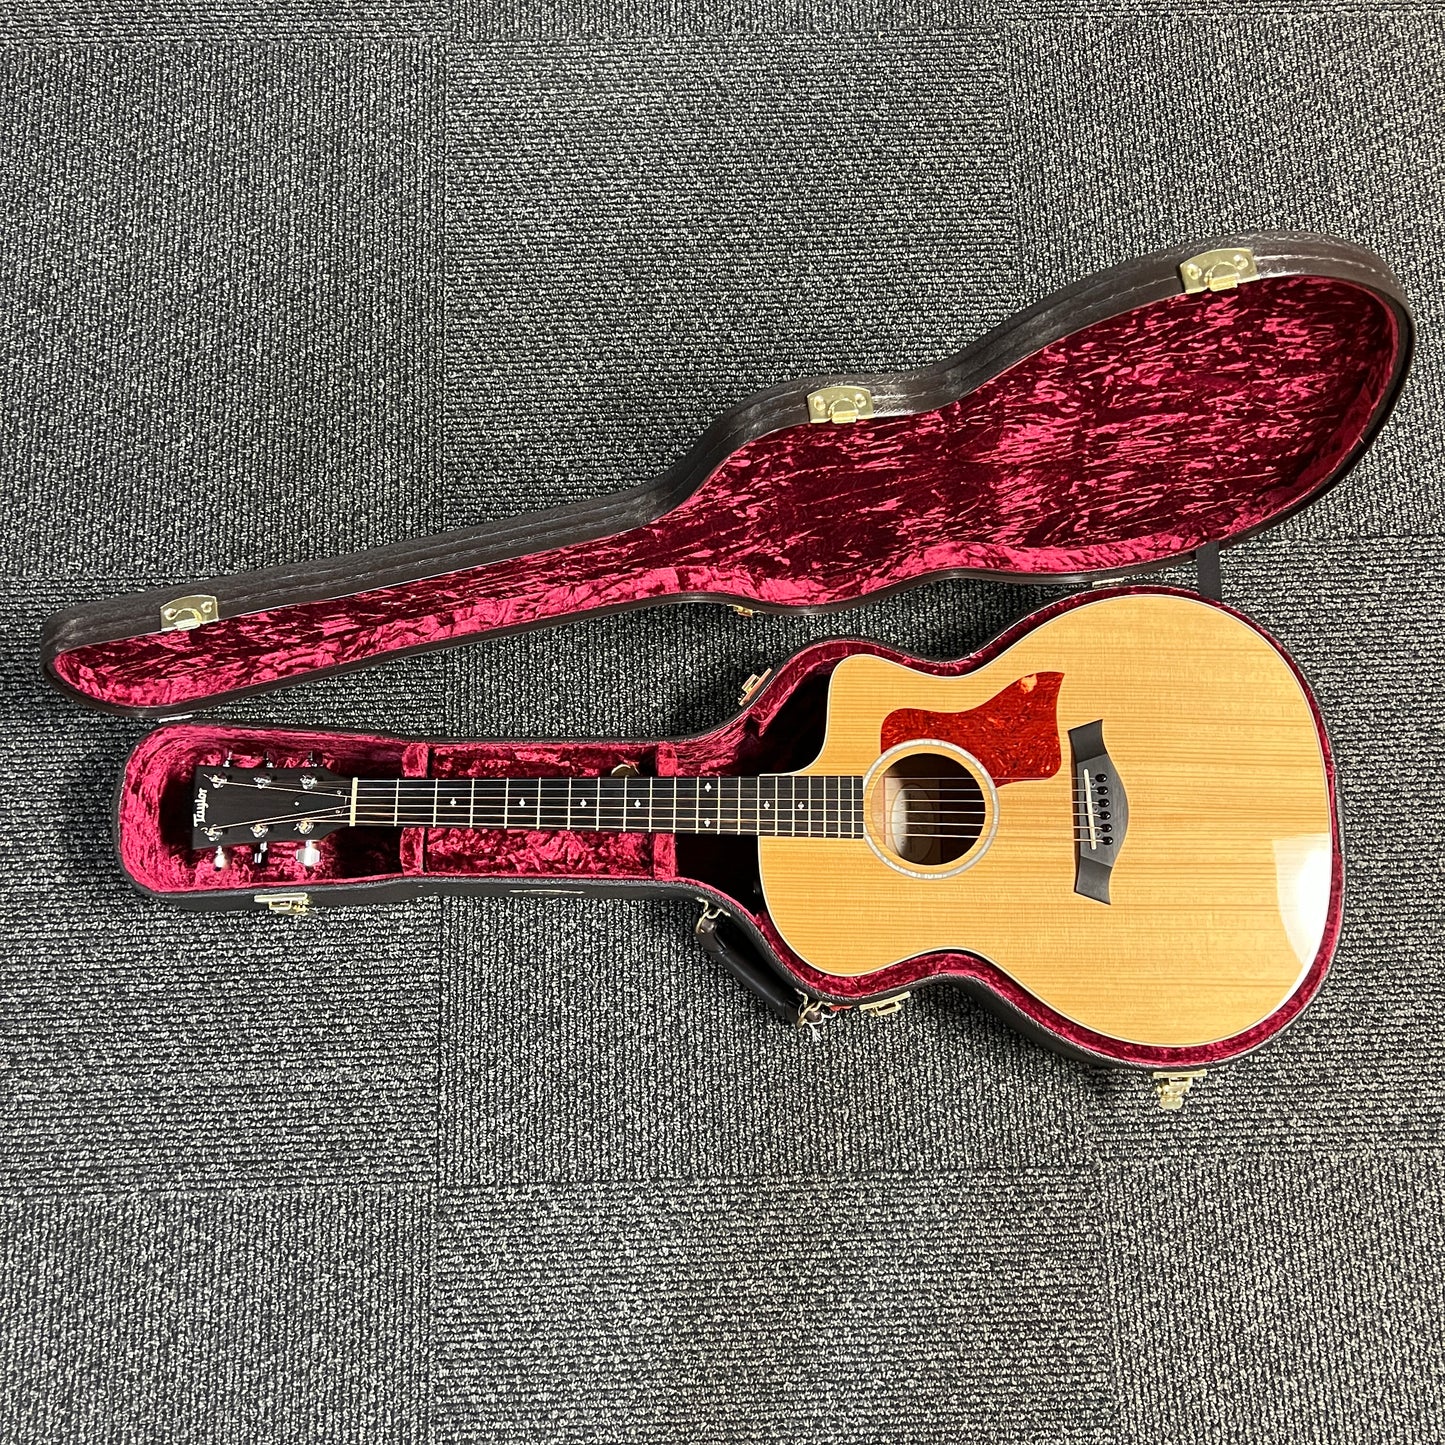 Used 2018 Taylor 214ce-K DLX Acoustic Guitar